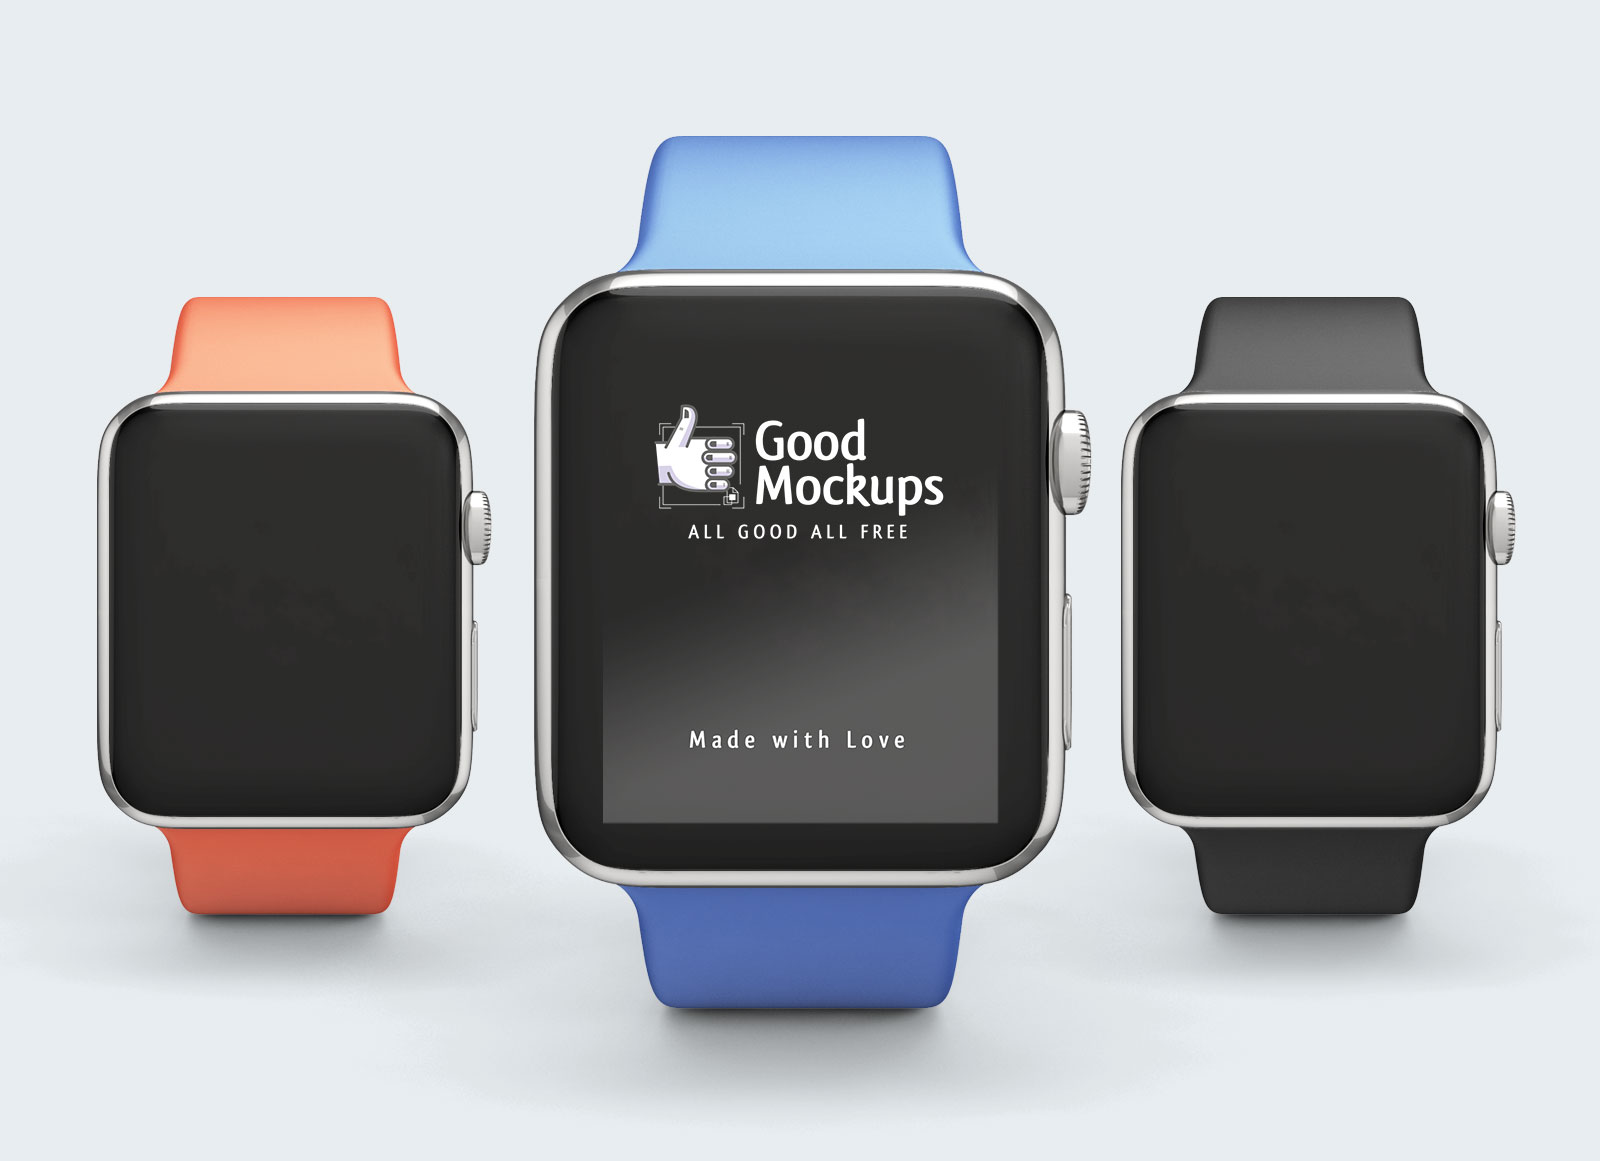 Download Free Apple Watch Mockup PSD with Changeable Sport Band ... PSD Mockup Templates